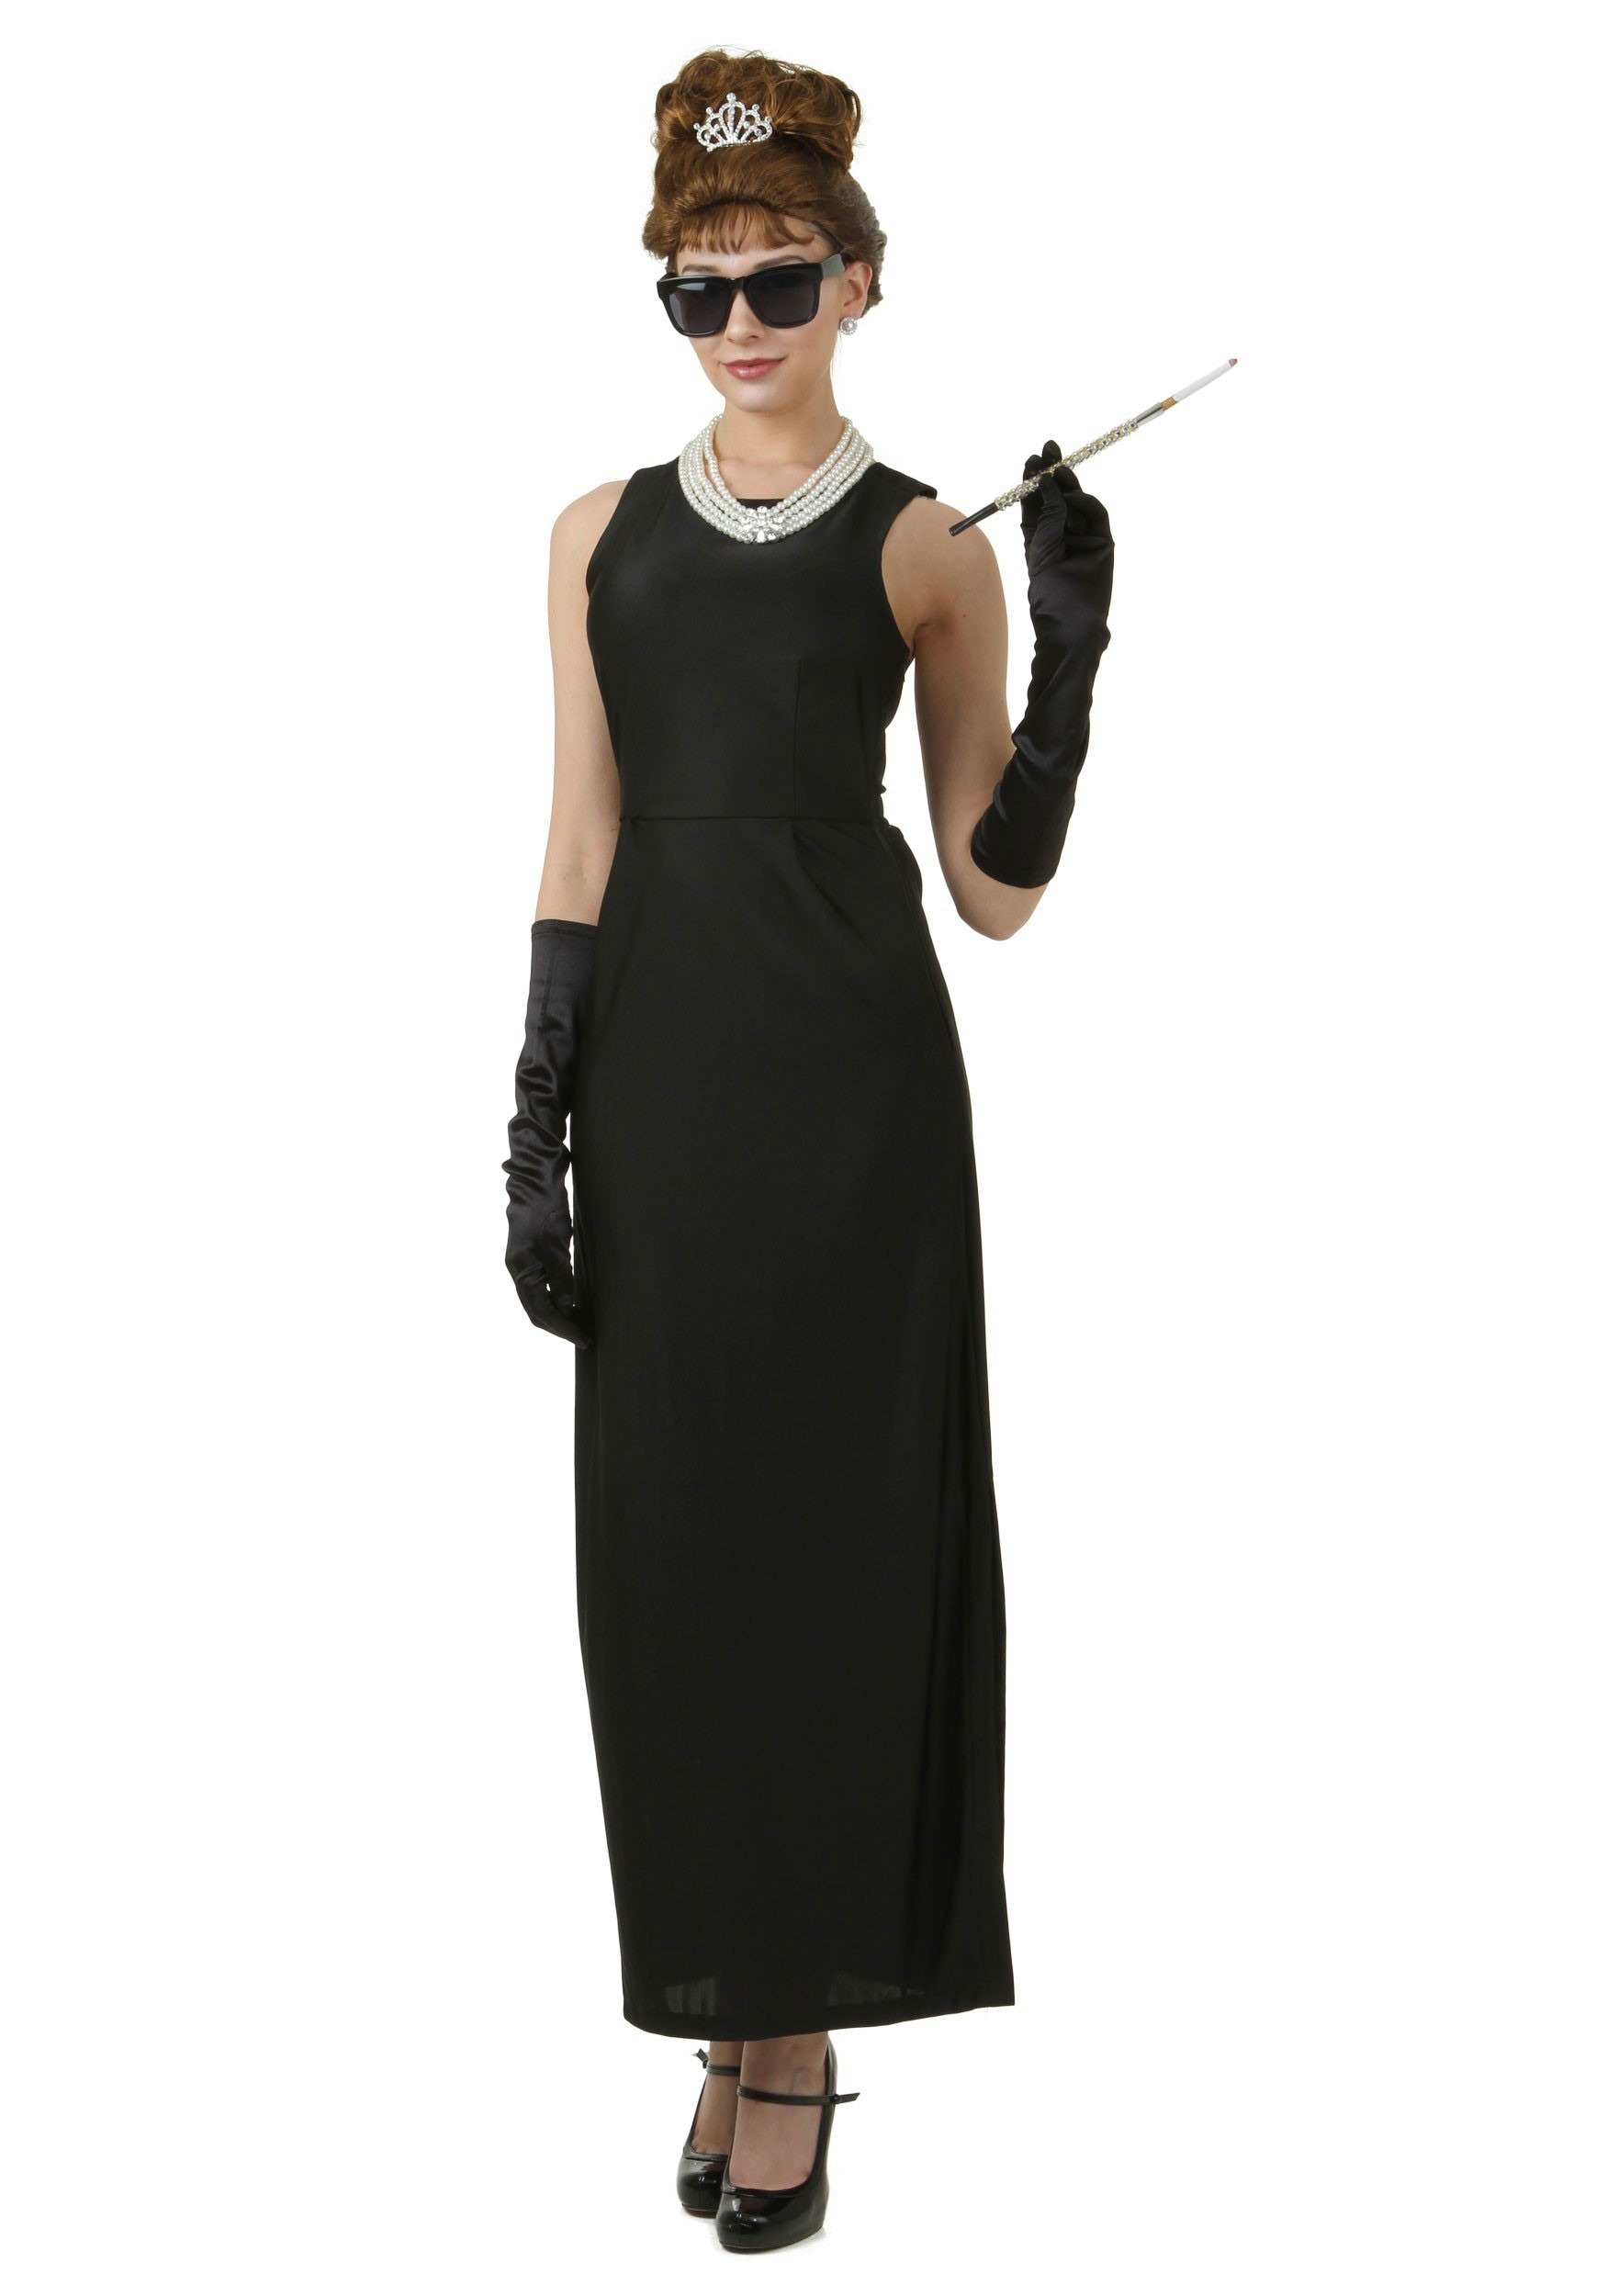 Photos - Fancy Dress FUN Costumes Plus Size Breakfast at Tiffany's Holly Golightly Costume for